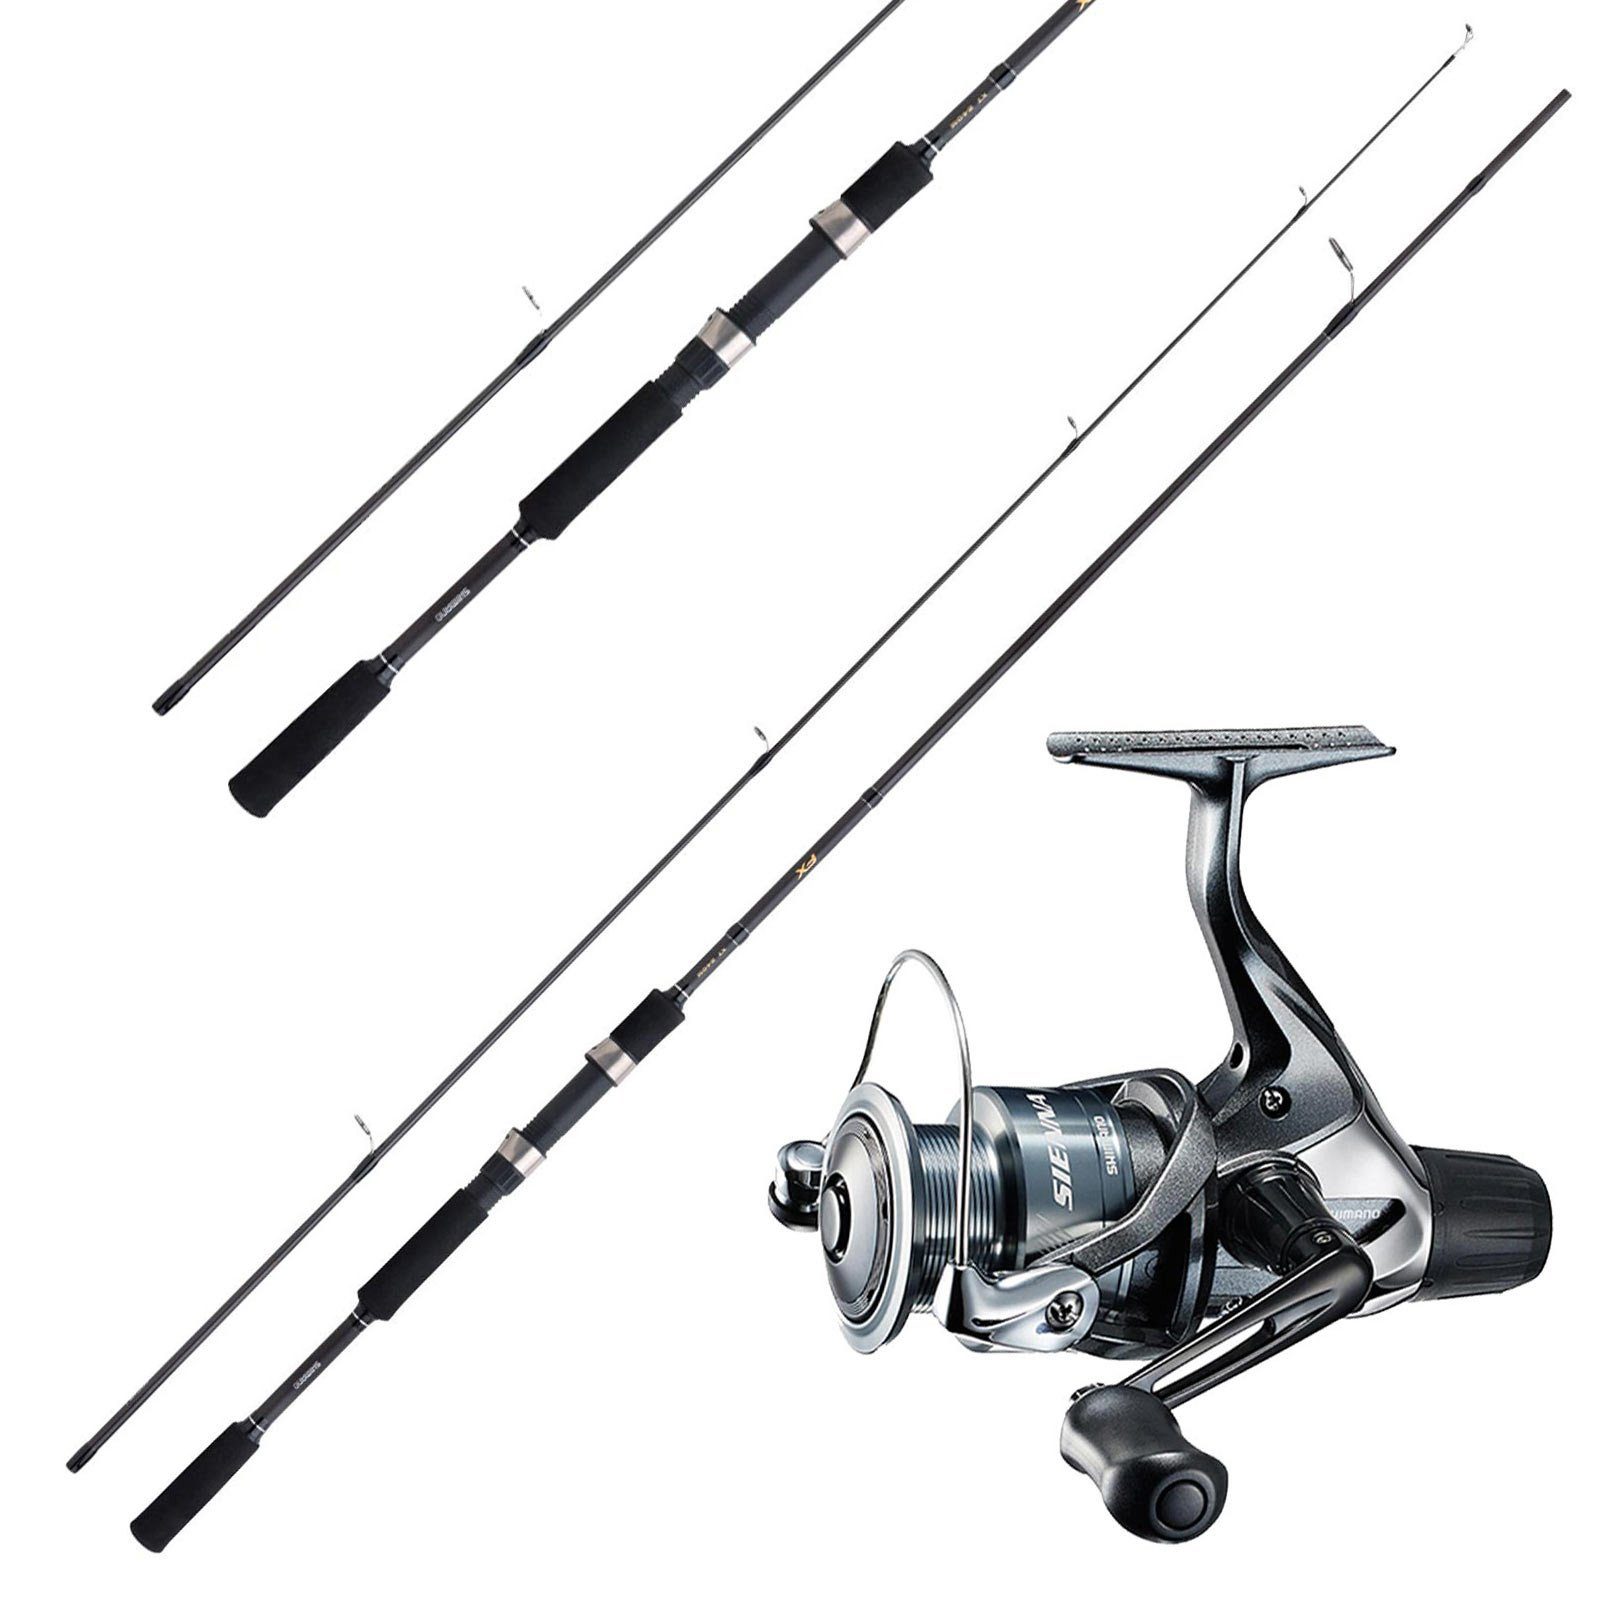 Shimano Spinnrute, Shimano Rolle Sienna & Shimano Rute 2,40m 10-30g Forelle  + Barsch Combo Angelset Angelcombo online kaufen | OTTO